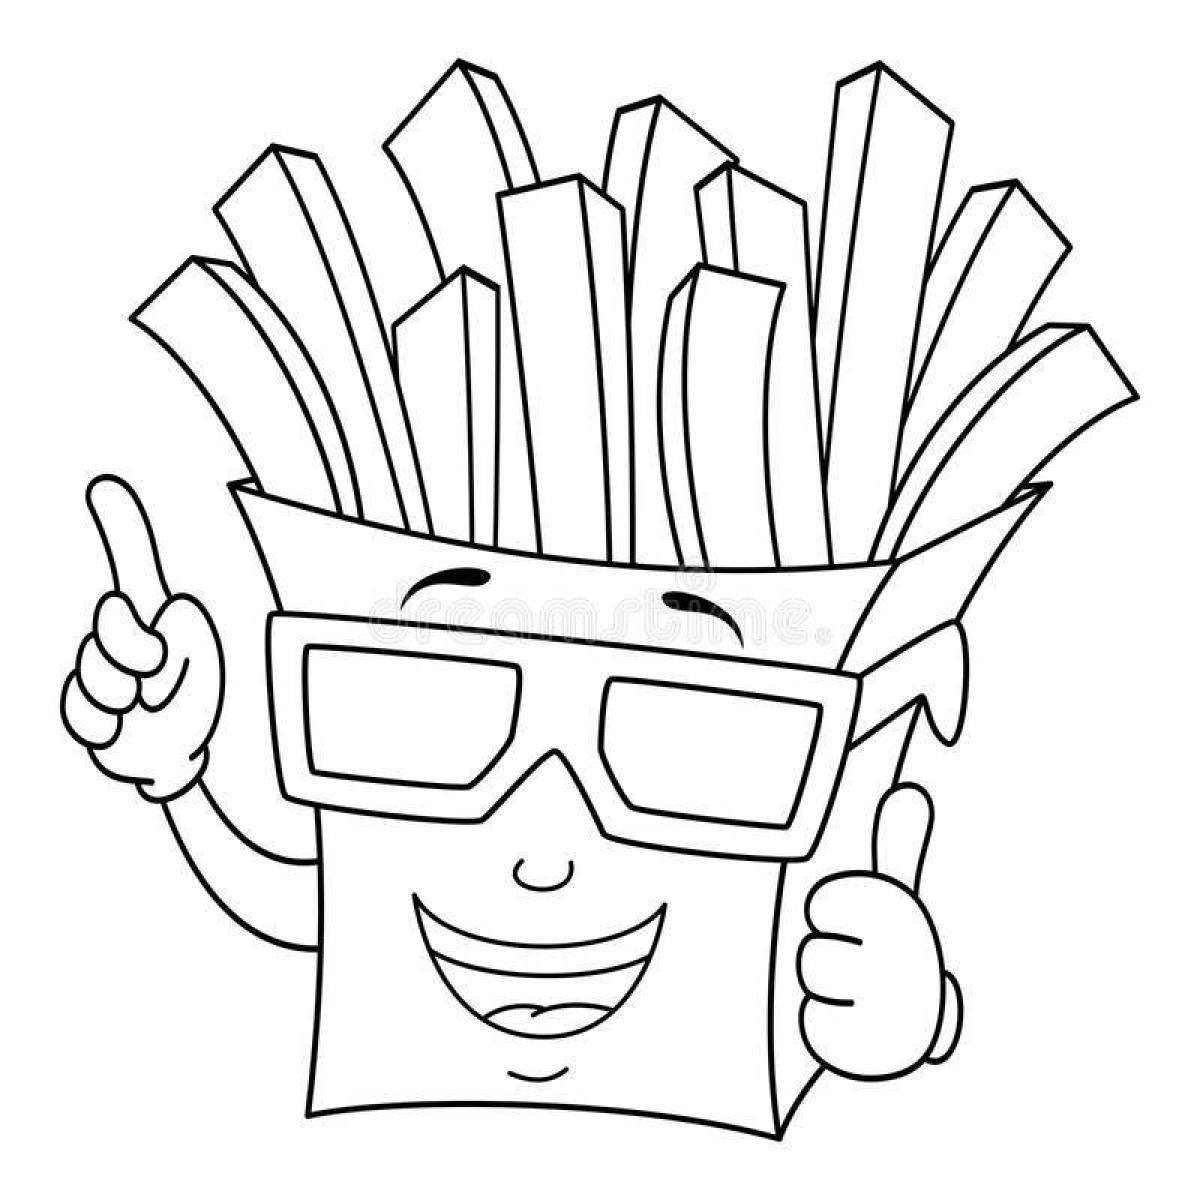 Salty french fries coloring